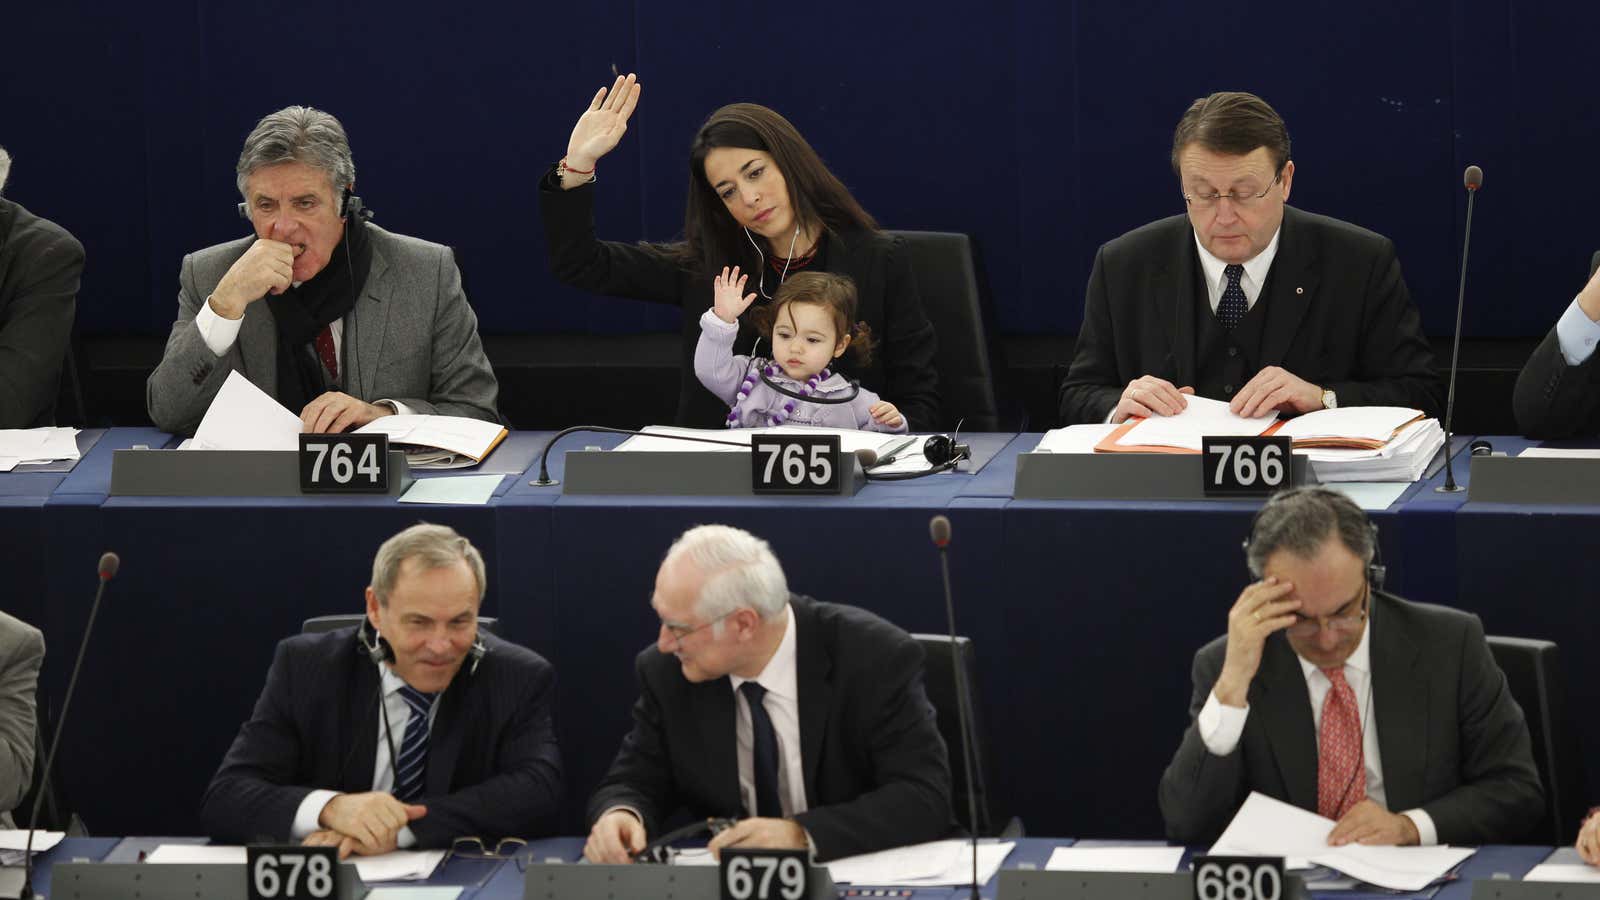 Italy’s Licia Ronzulli and her daughter at Europe’s parliament.